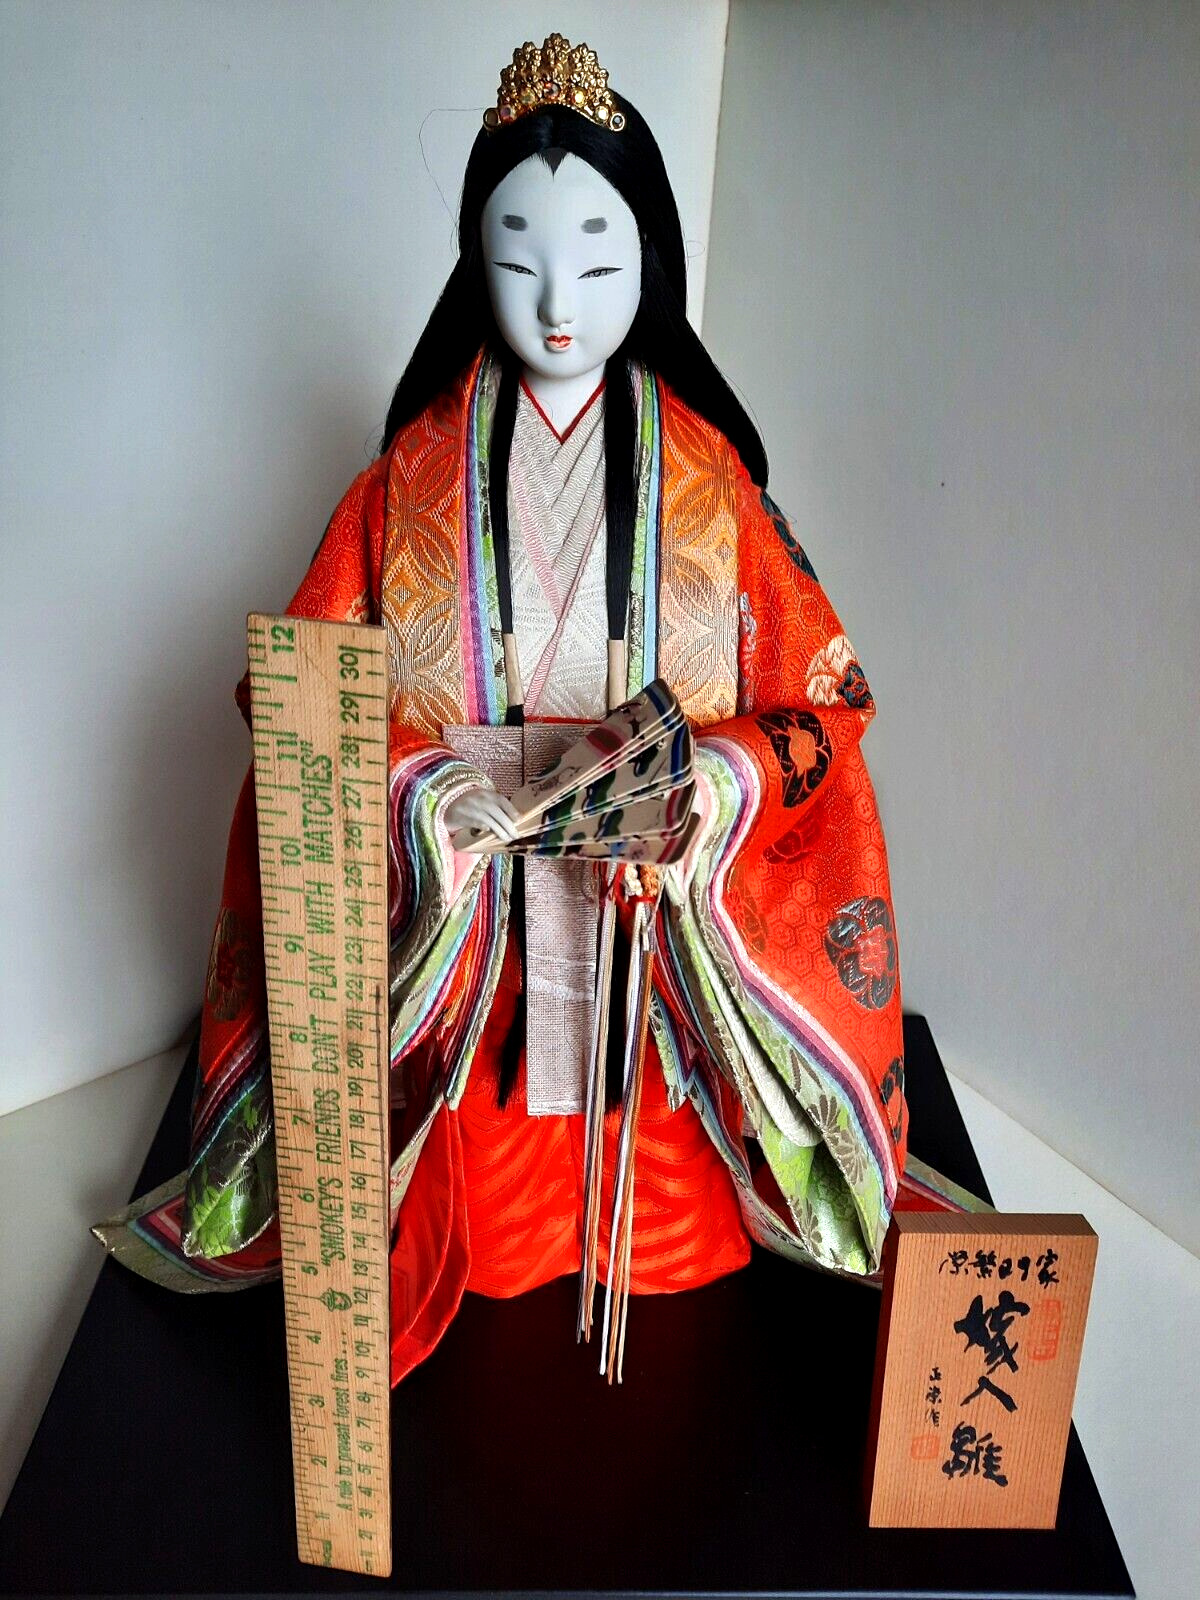 Japanese Handmade Bride Doll on Stand,  Kyoto, Japan 1990s